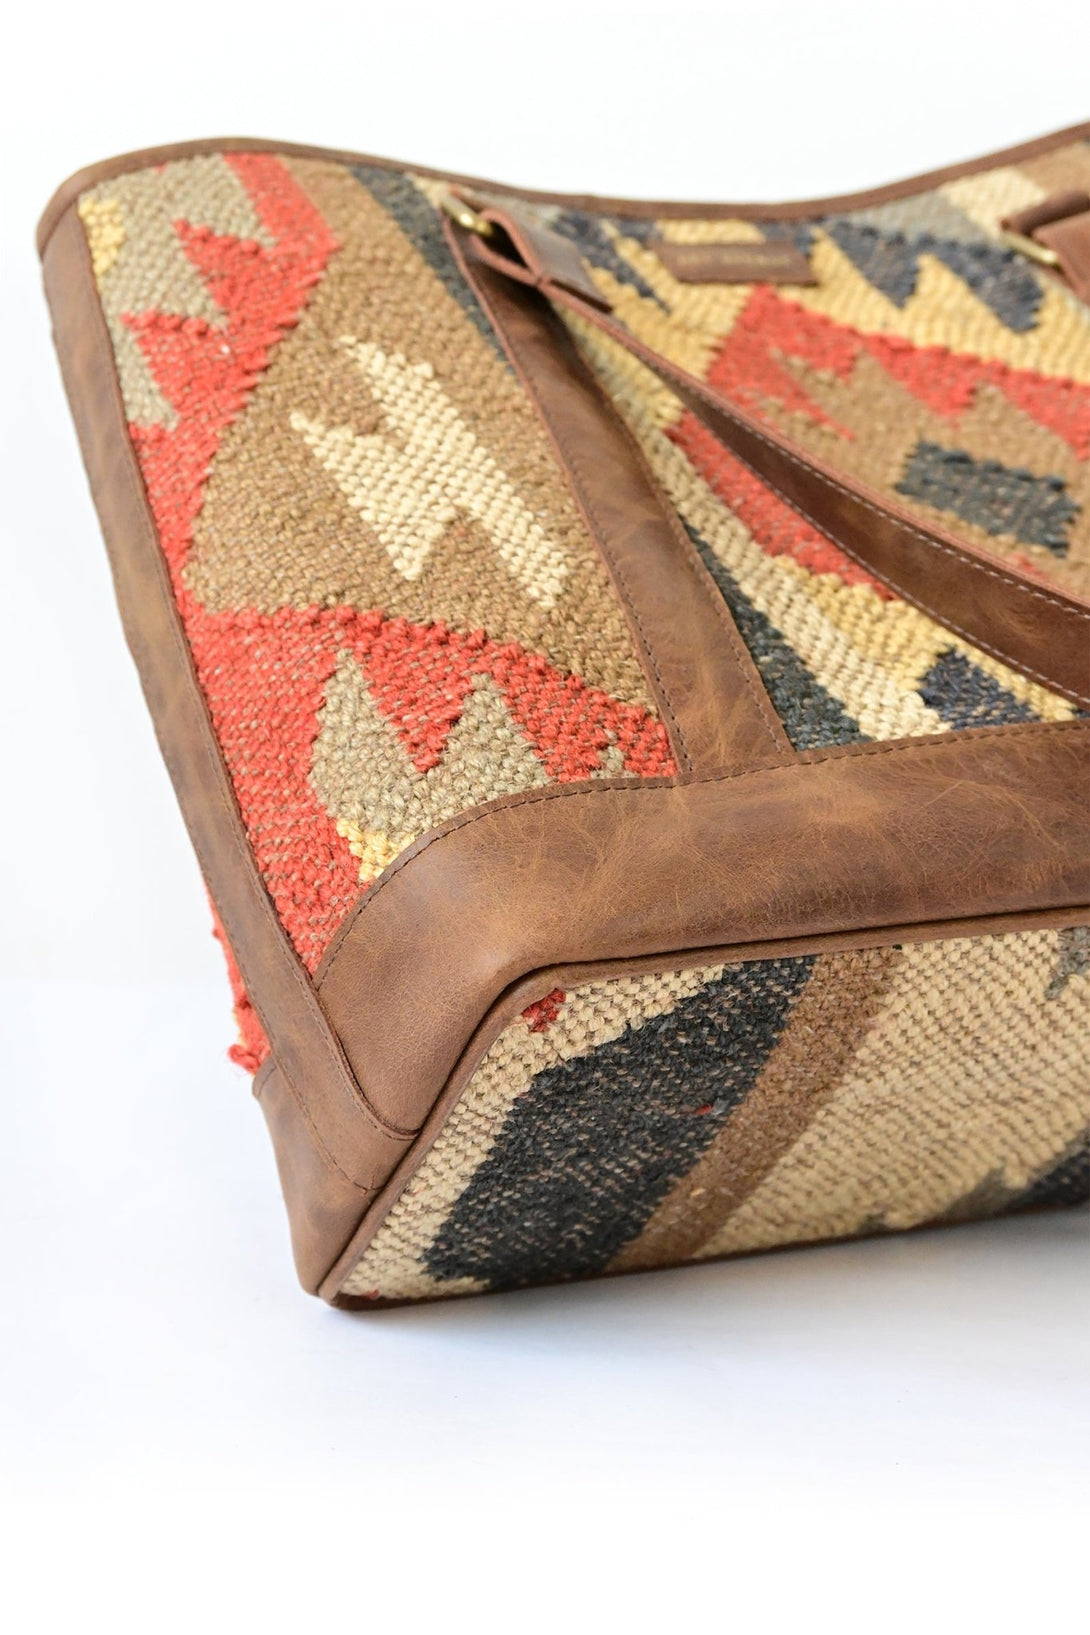 NYMPH - LEATHER AND KILIM BAG - ART AVENUE